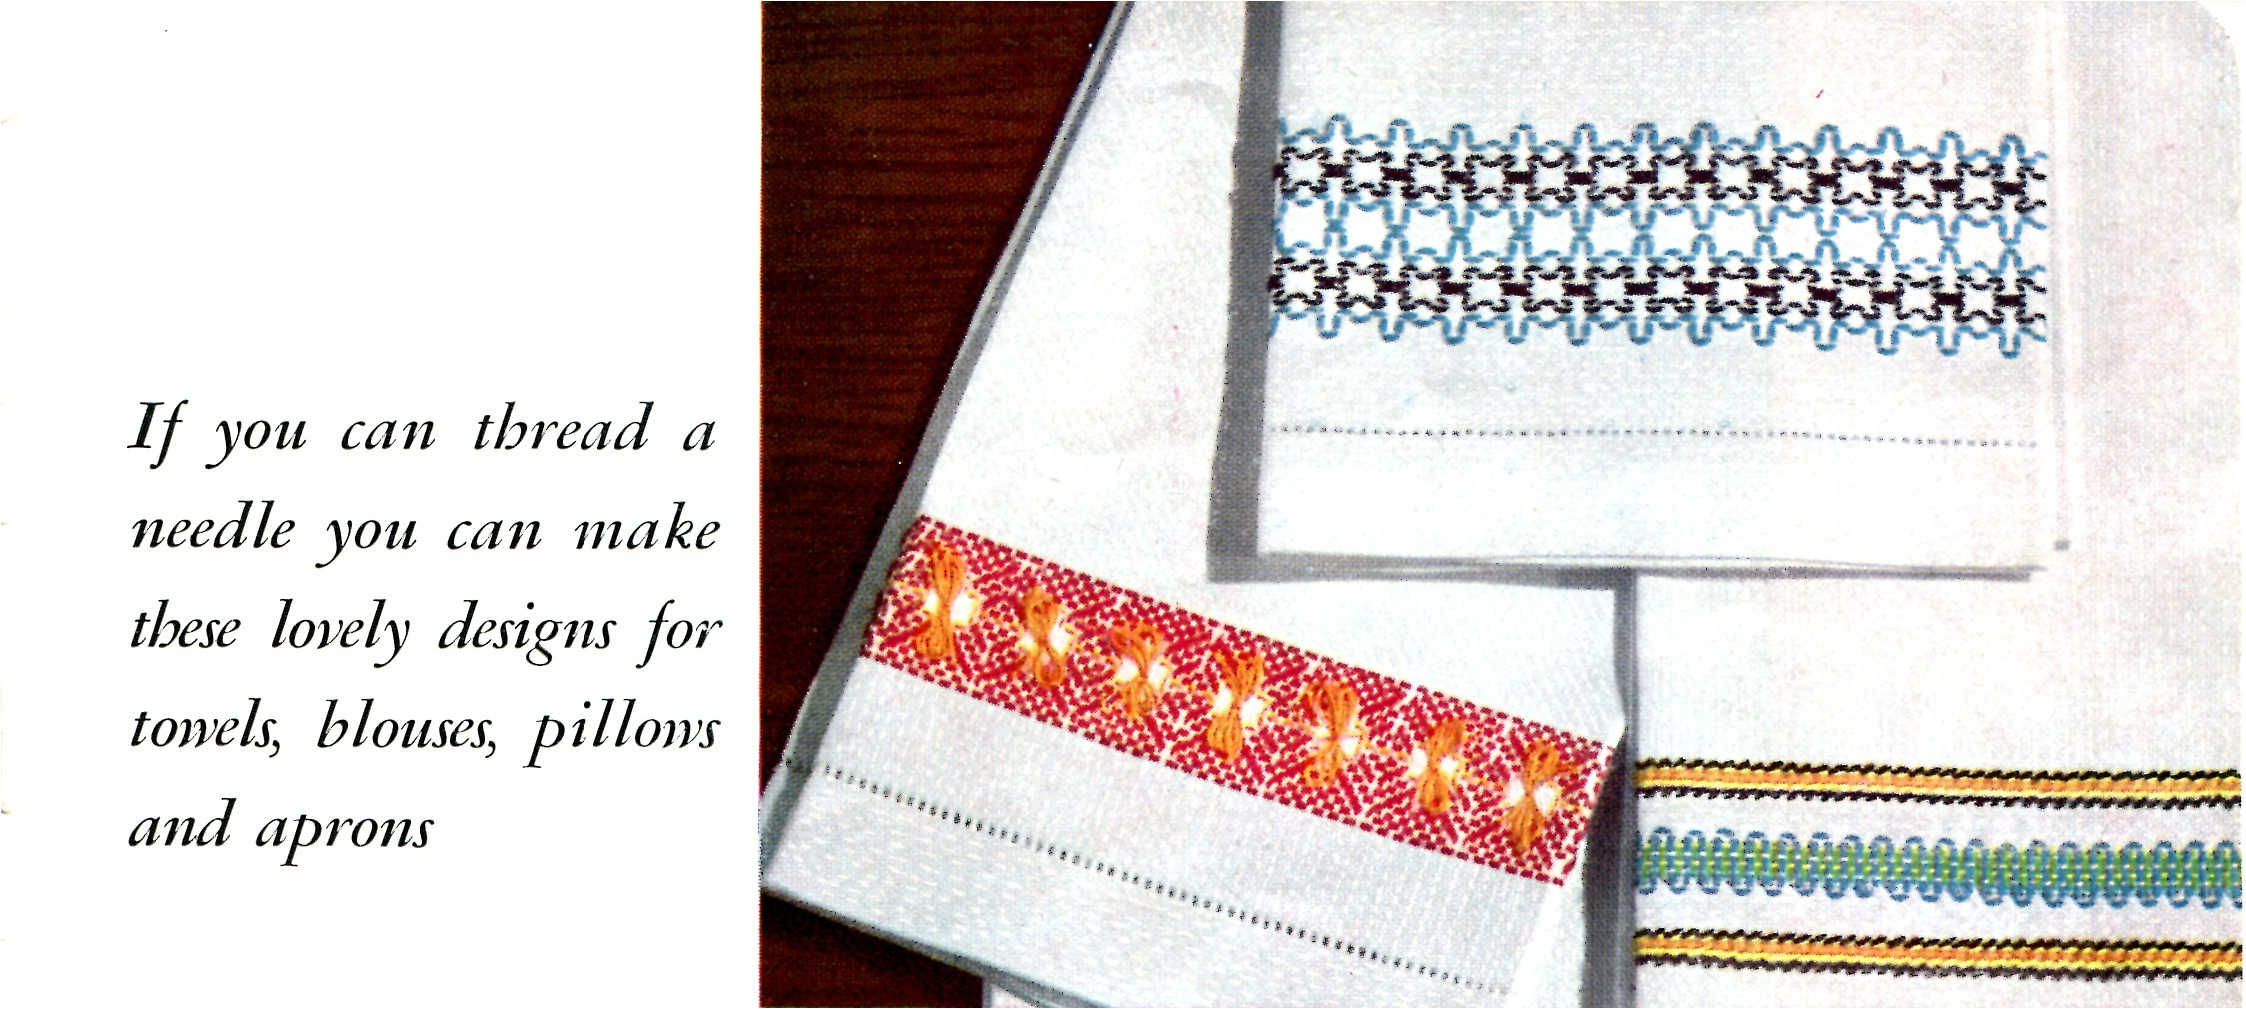 Huck Embroidery Patterns Free How To Do Swedish Huck Weaving Embroidery Vintage Crafts And More